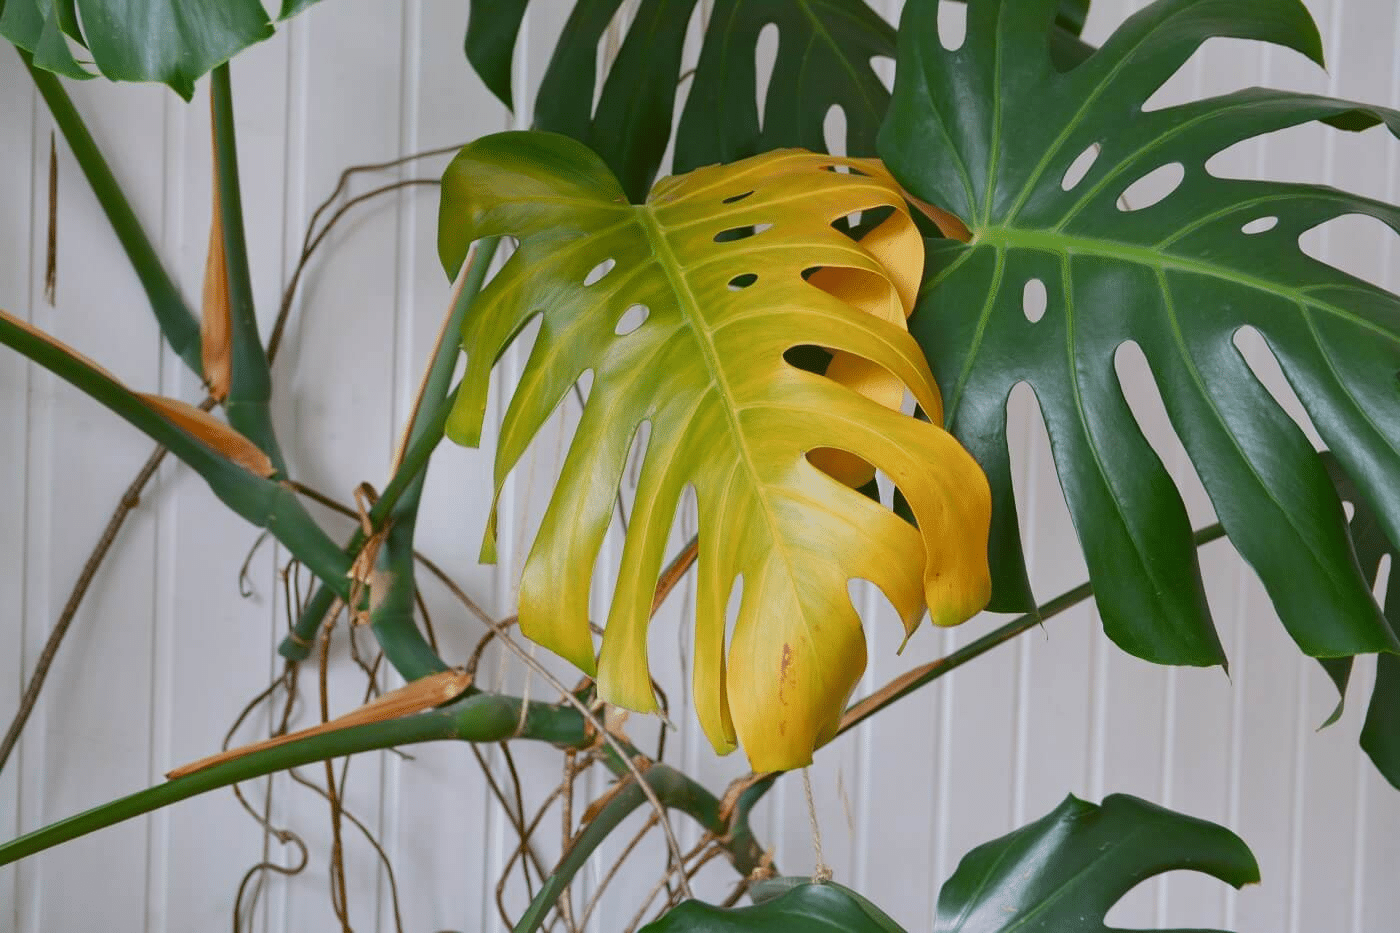 Curled Monstera leaves, showing signs of monstera leaves curling and in need of revival.